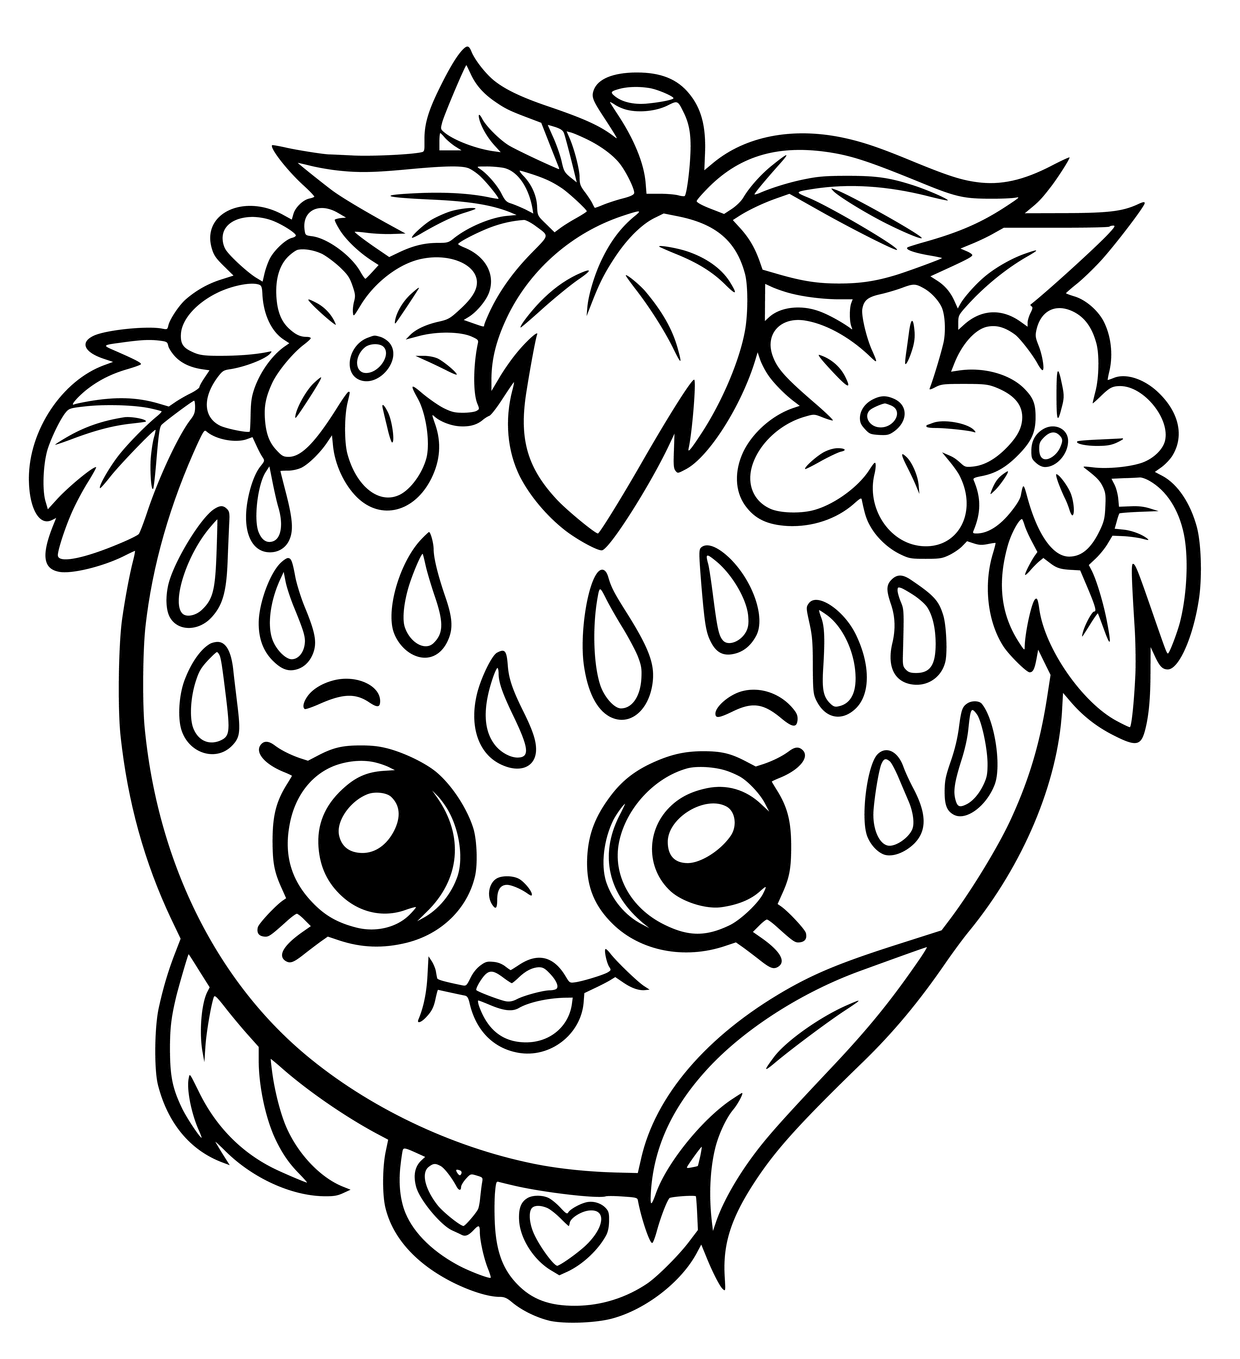 Shopkins Coloring Pages | Free download on ClipArtMag